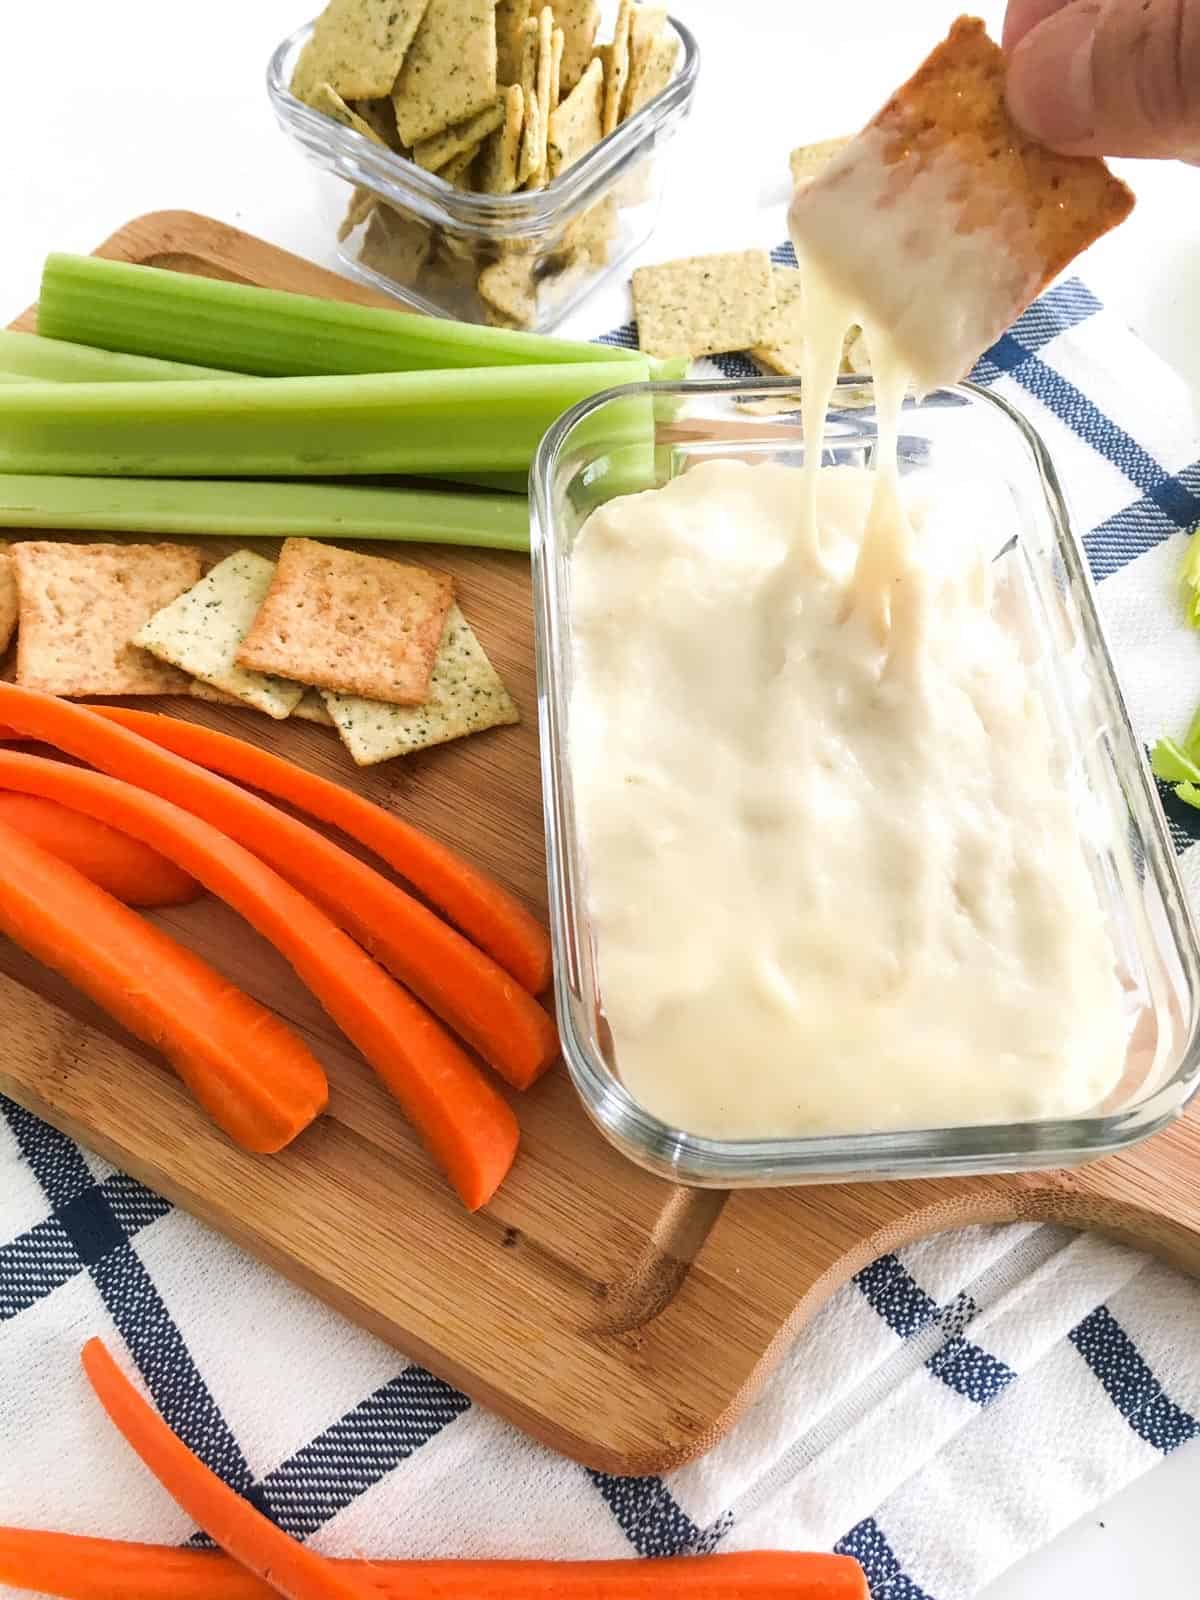 Cracker being dipped into bowl of cheese dip with veggies scattered around it.